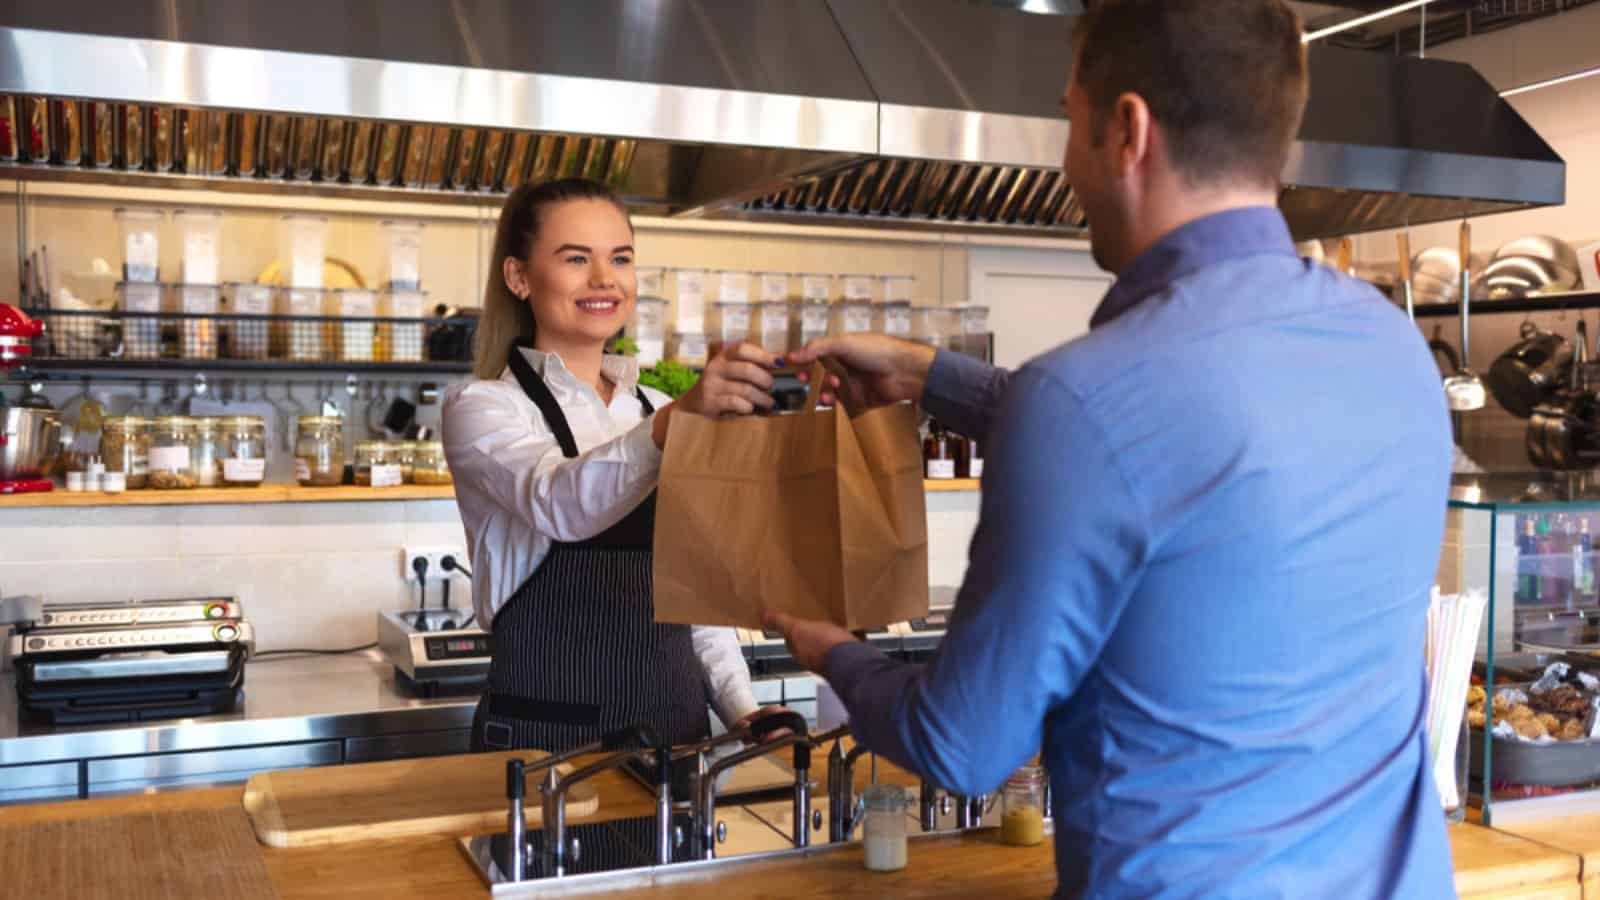 Man getting parcel from restaurant